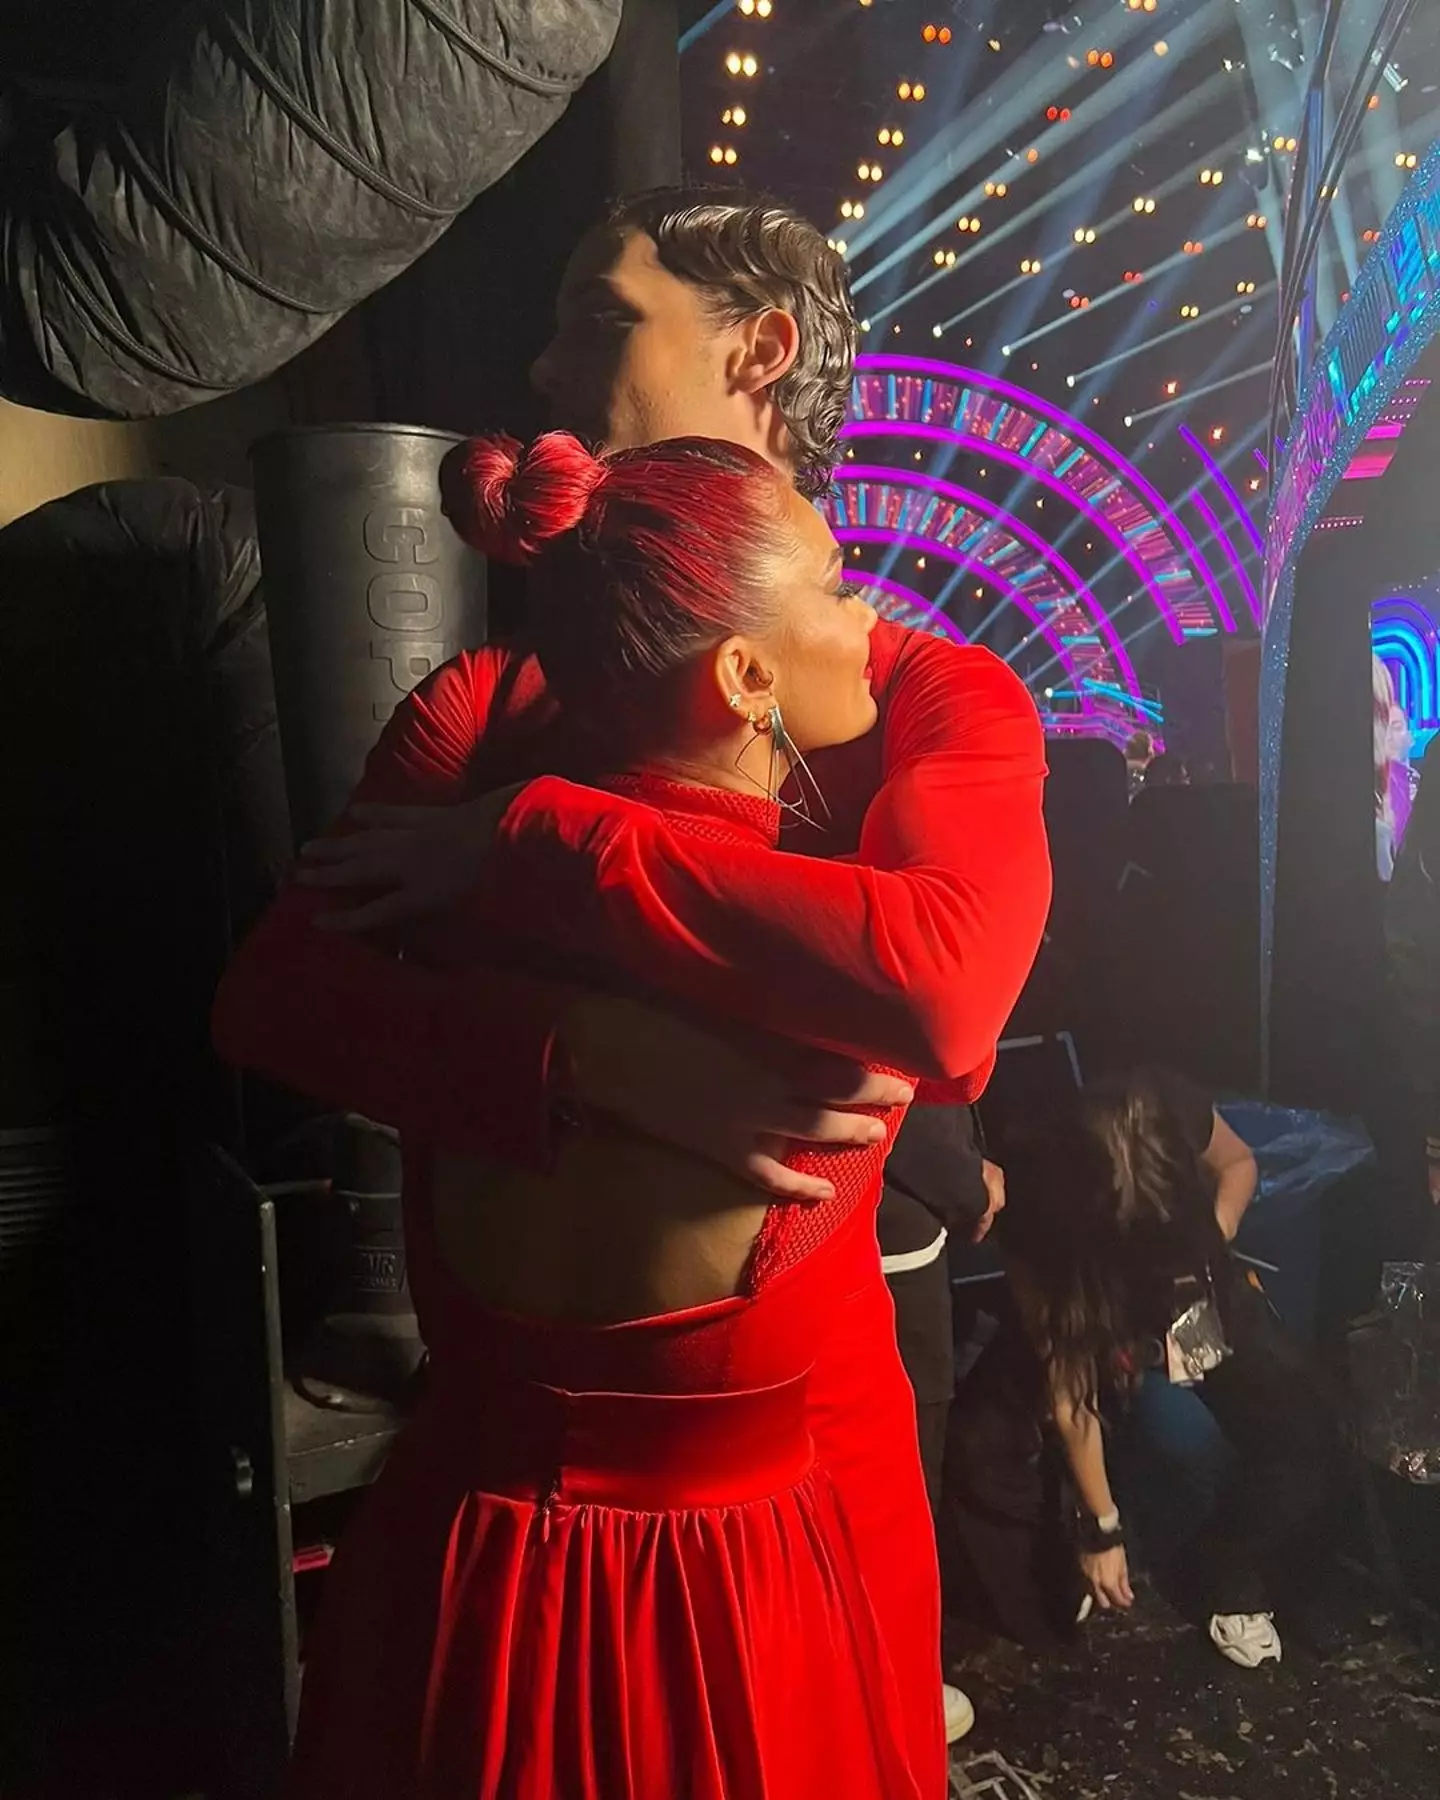 Bobby Brazier and Dianne Buswell had a tough week.